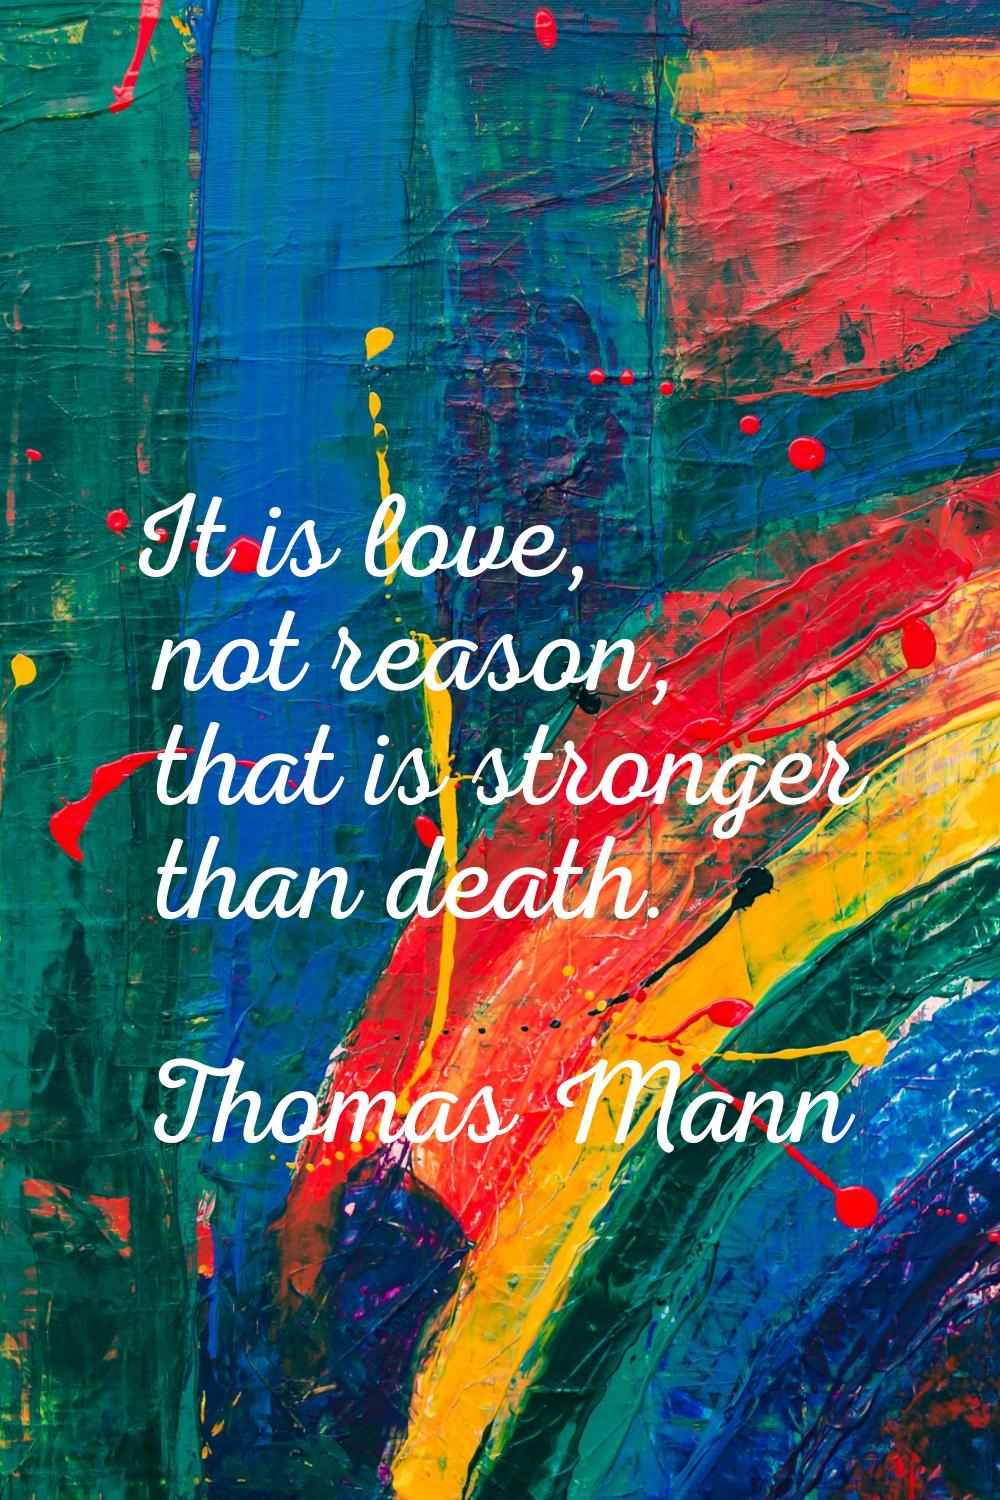 It is love, not reason, that is stronger than death.